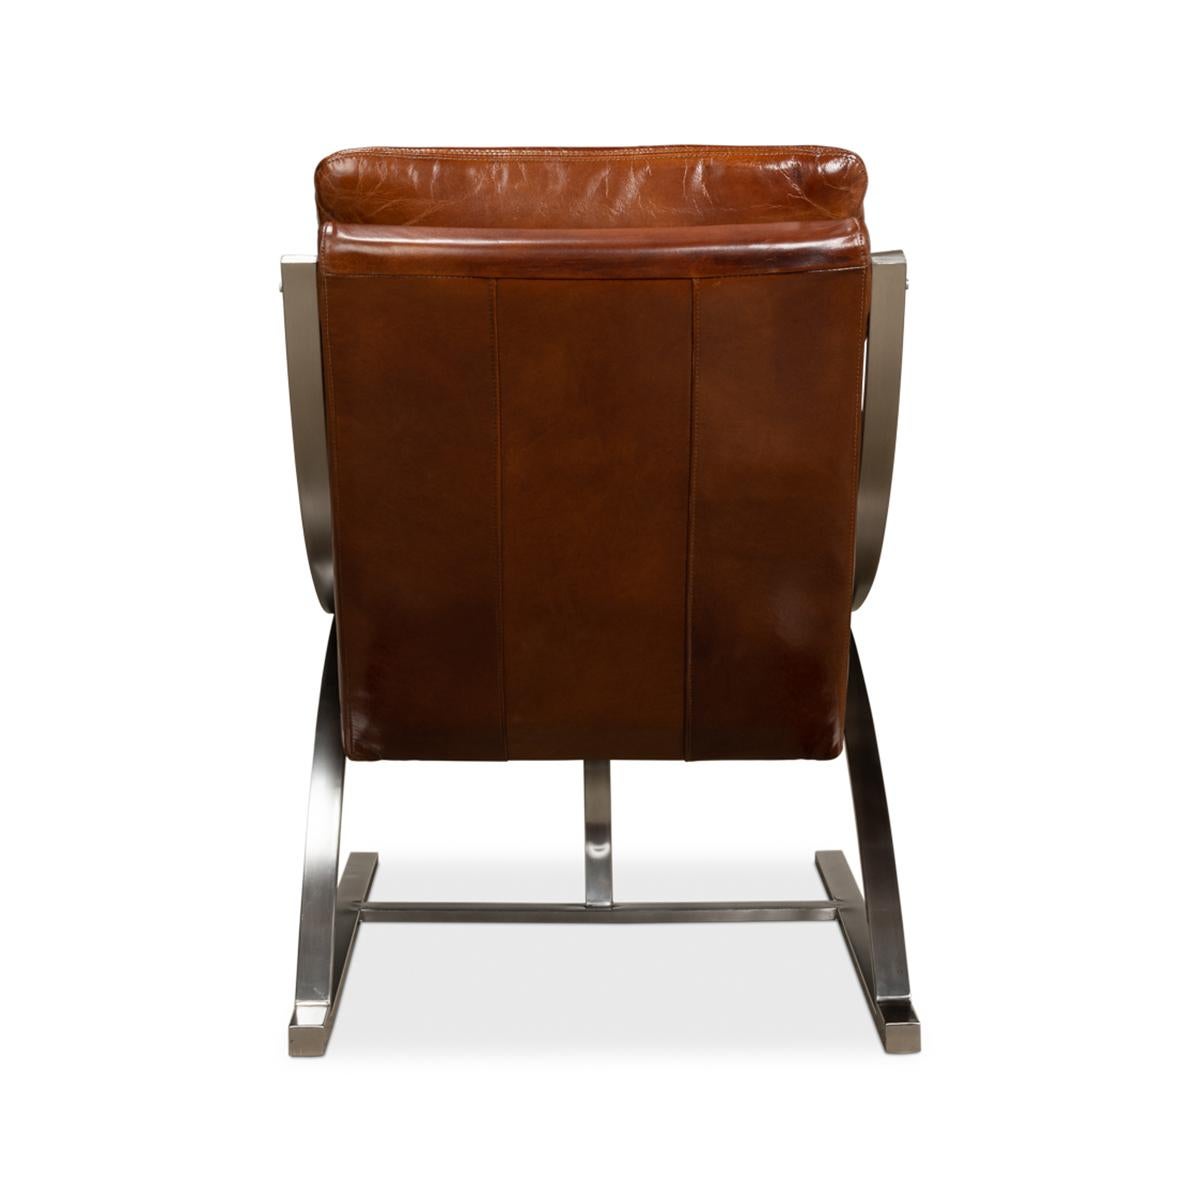 Mid-Century Modern Modern Stainless Steel and Brown Leather Chair For Sale